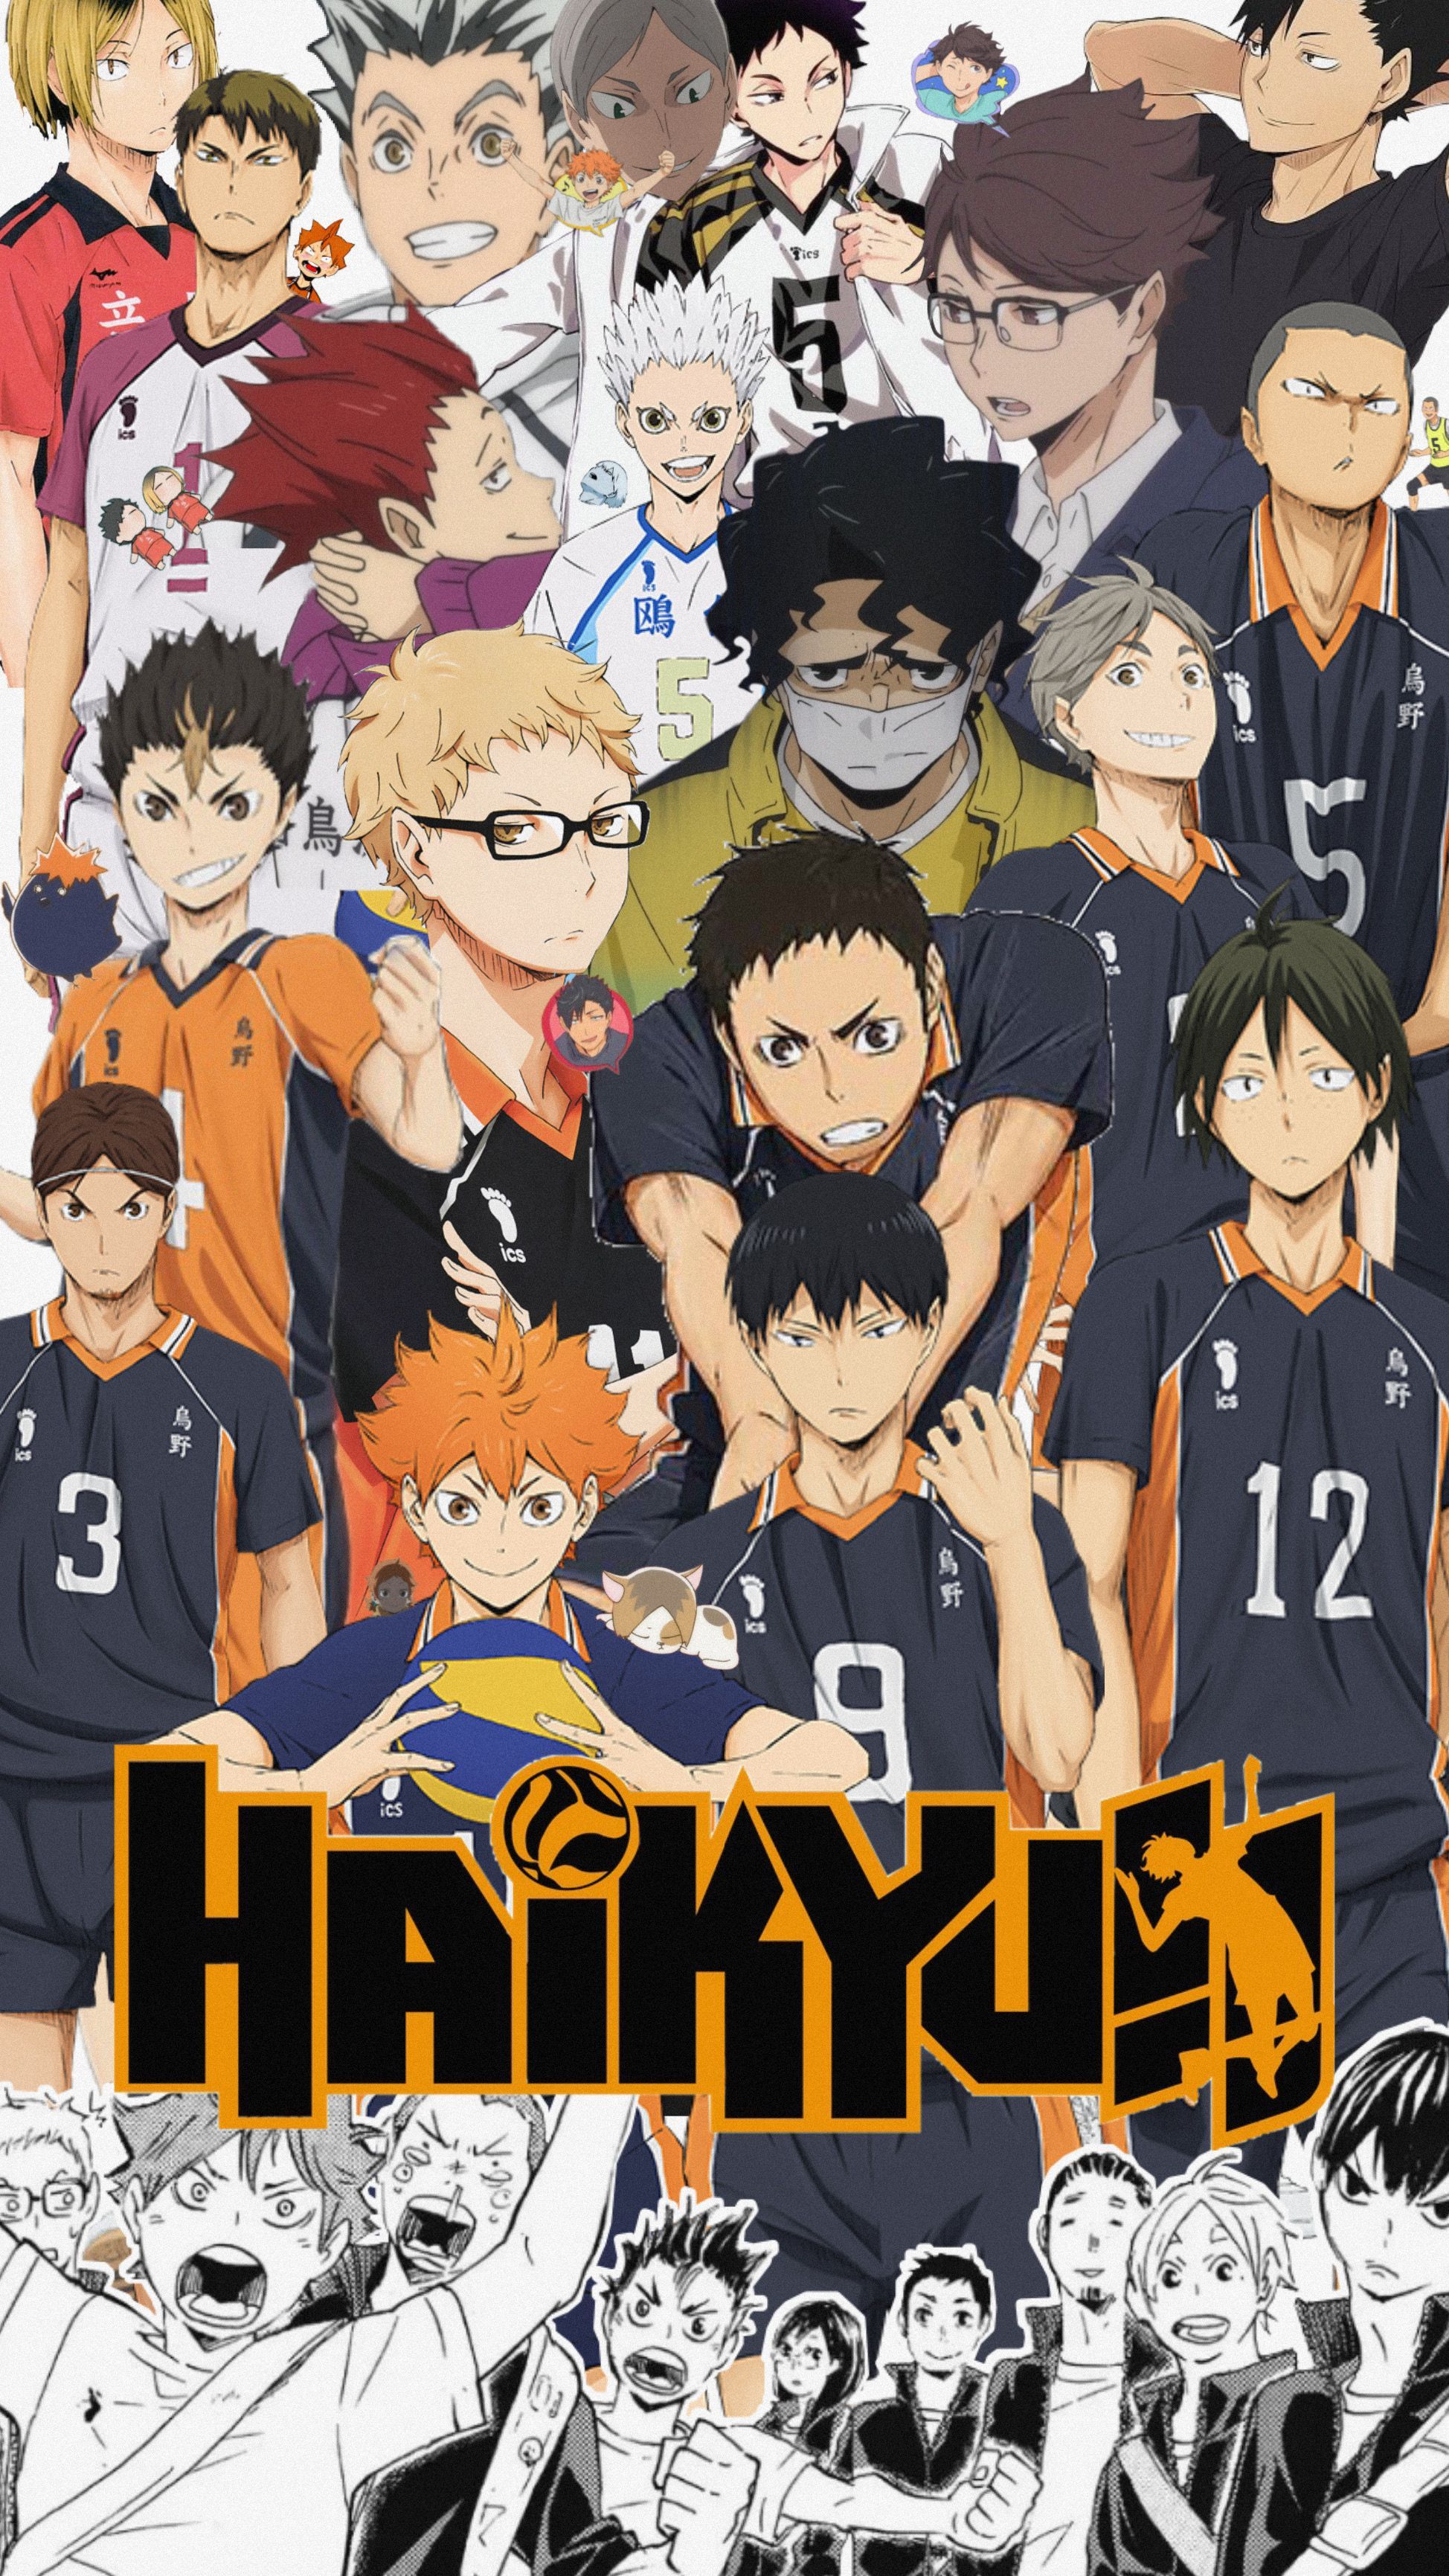 Sims 4 CC's - The Best: Haikyuu Poster - Wallpaper by DominationKid